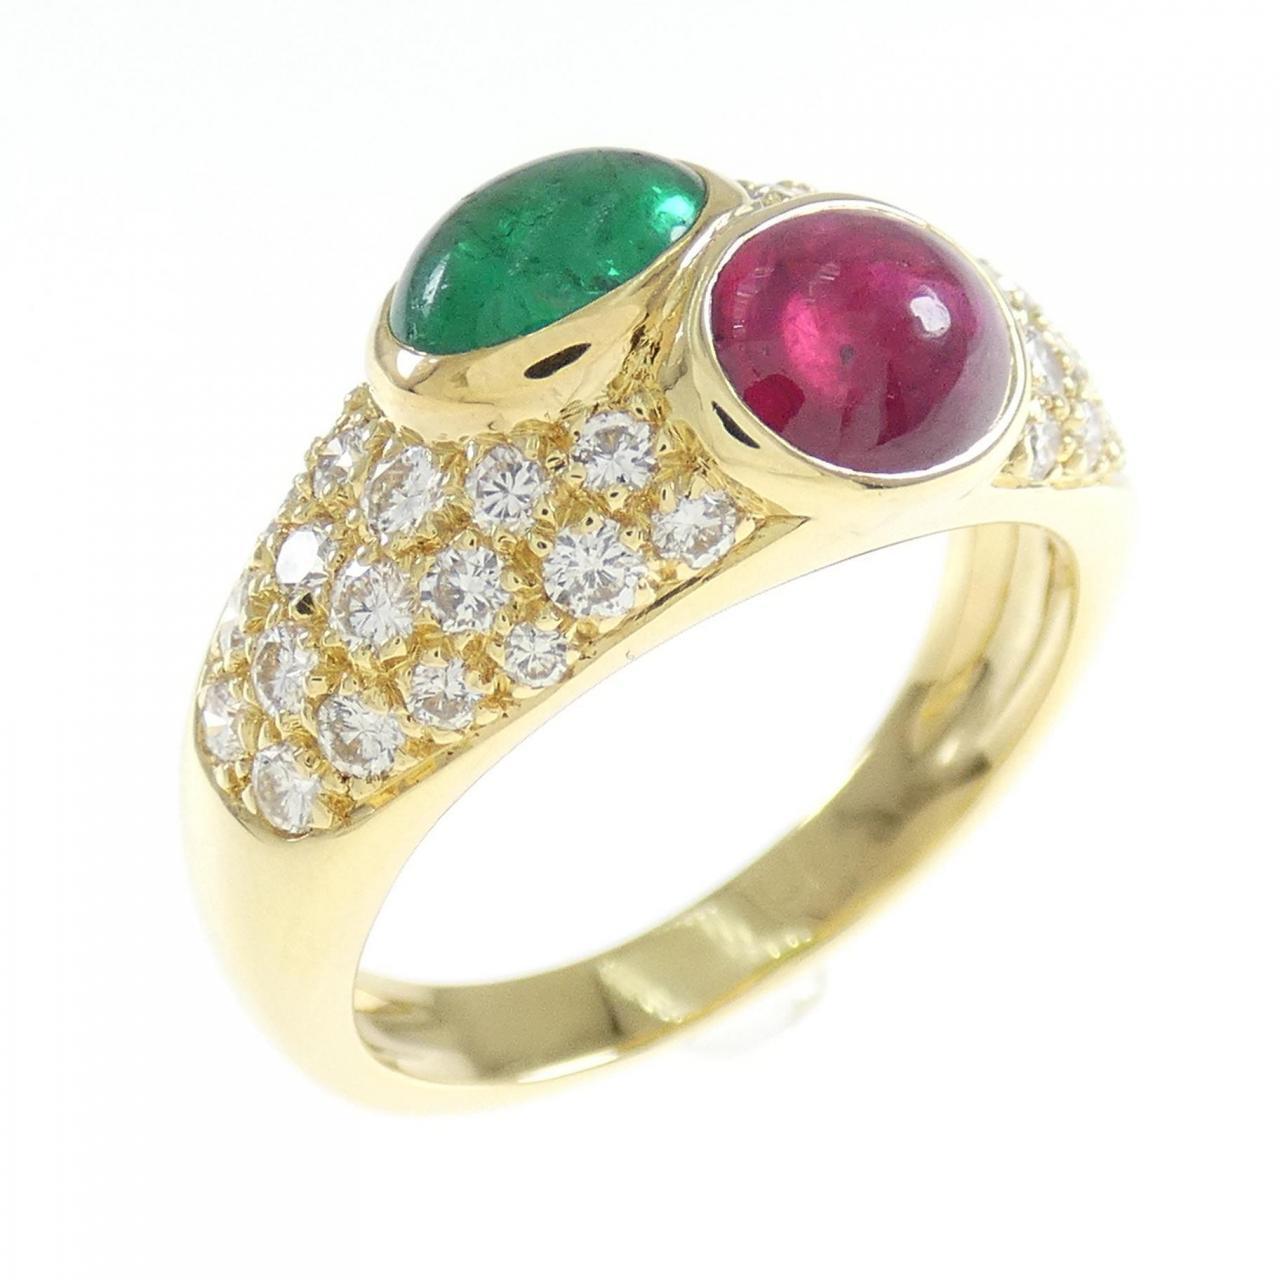 Bvlgari Made in France 18k Yellow Gold, Diamond, Cabochon Emerald & Ruby Ring 1